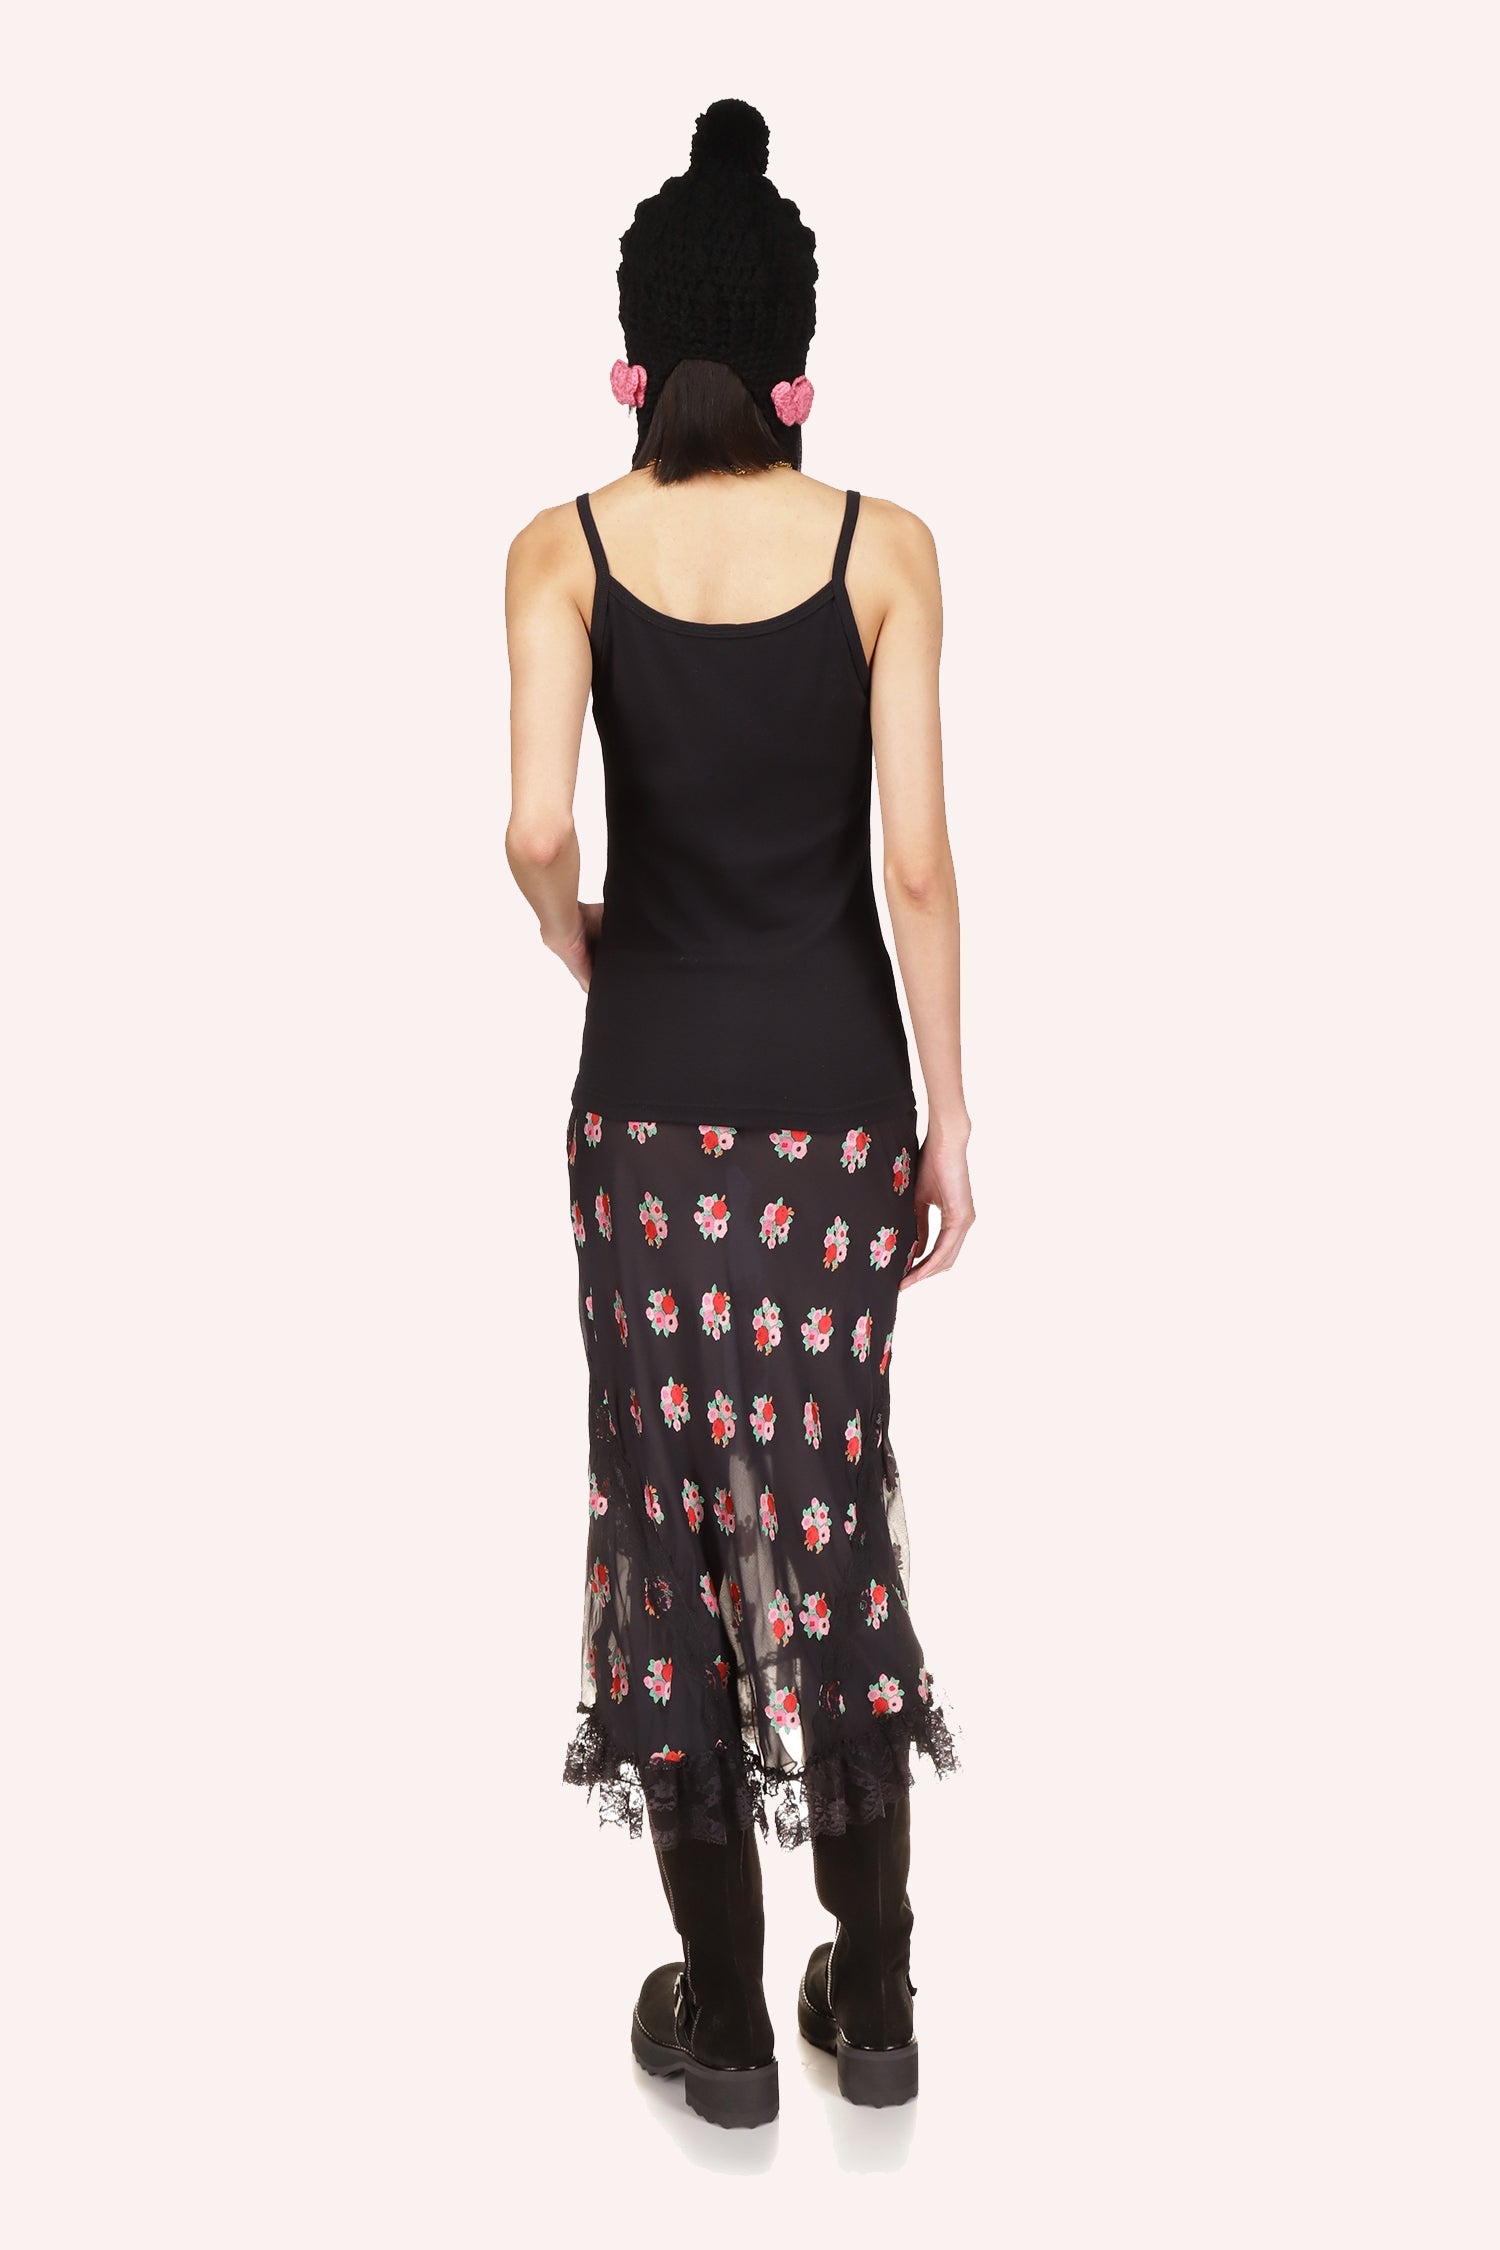 Skirt Black, under knee long, see-through from hips down, black lace at bottom, pattern of pink and red Rosie posies